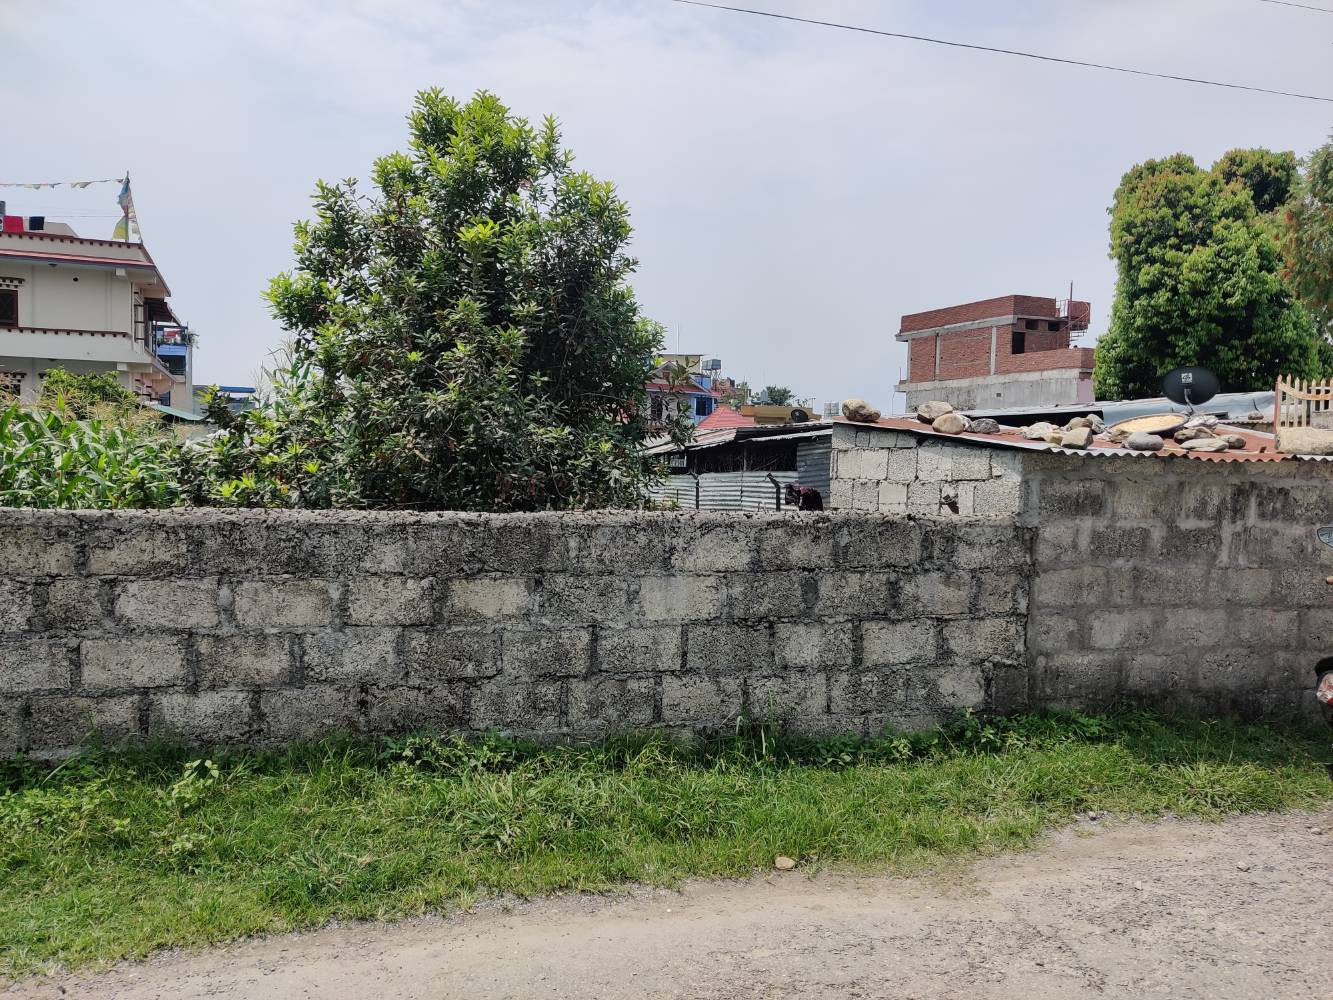 thumbnail of Land for sale in pokhara